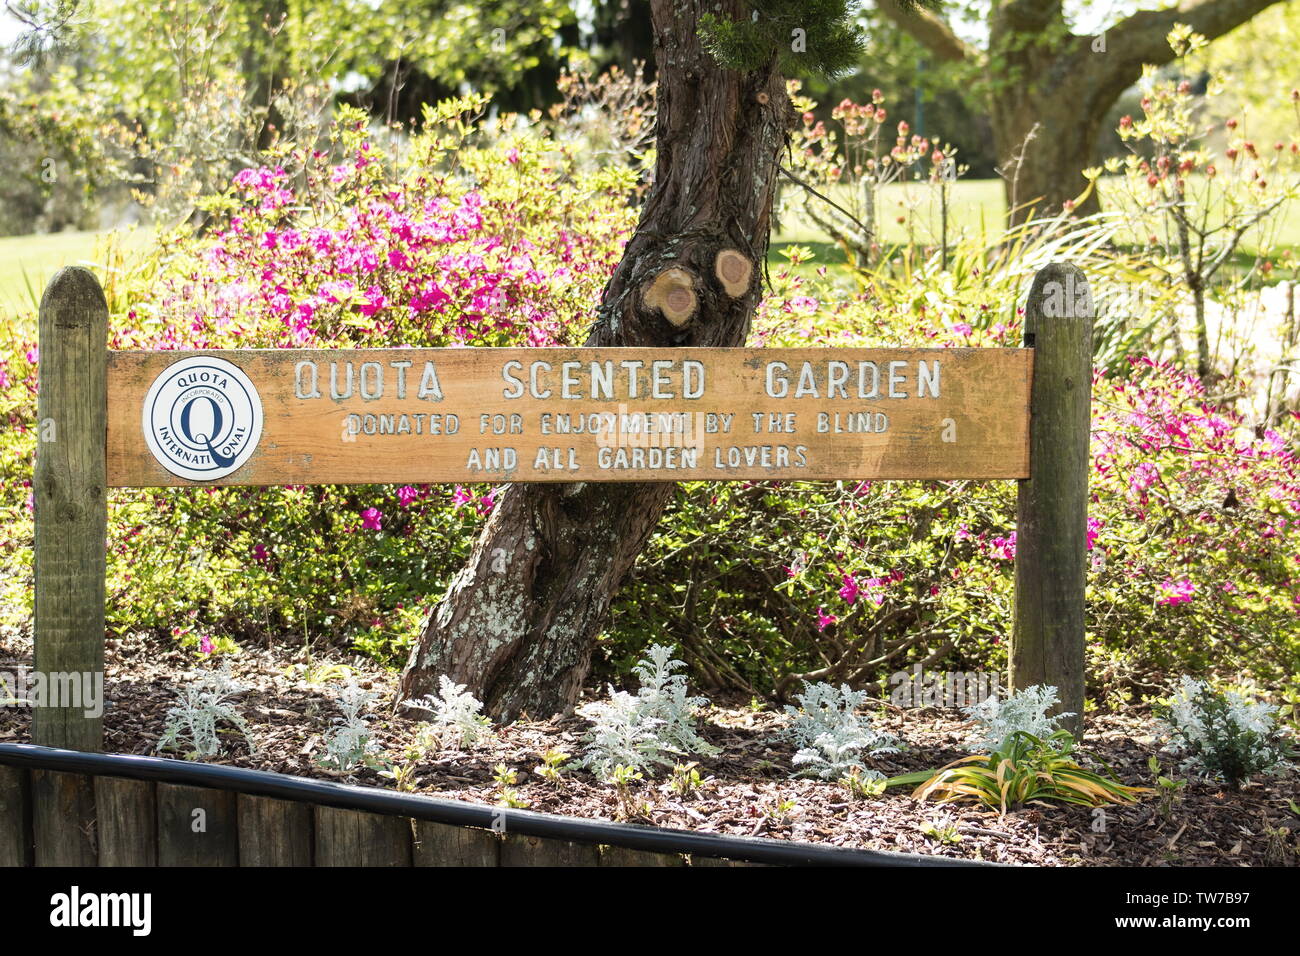 Rotorua, New Zealand - October 16, 2018: Signpost for the Quota Scented Garden donated by the blind for the enjoyment of all located at Kuirau Park. Stock Photo